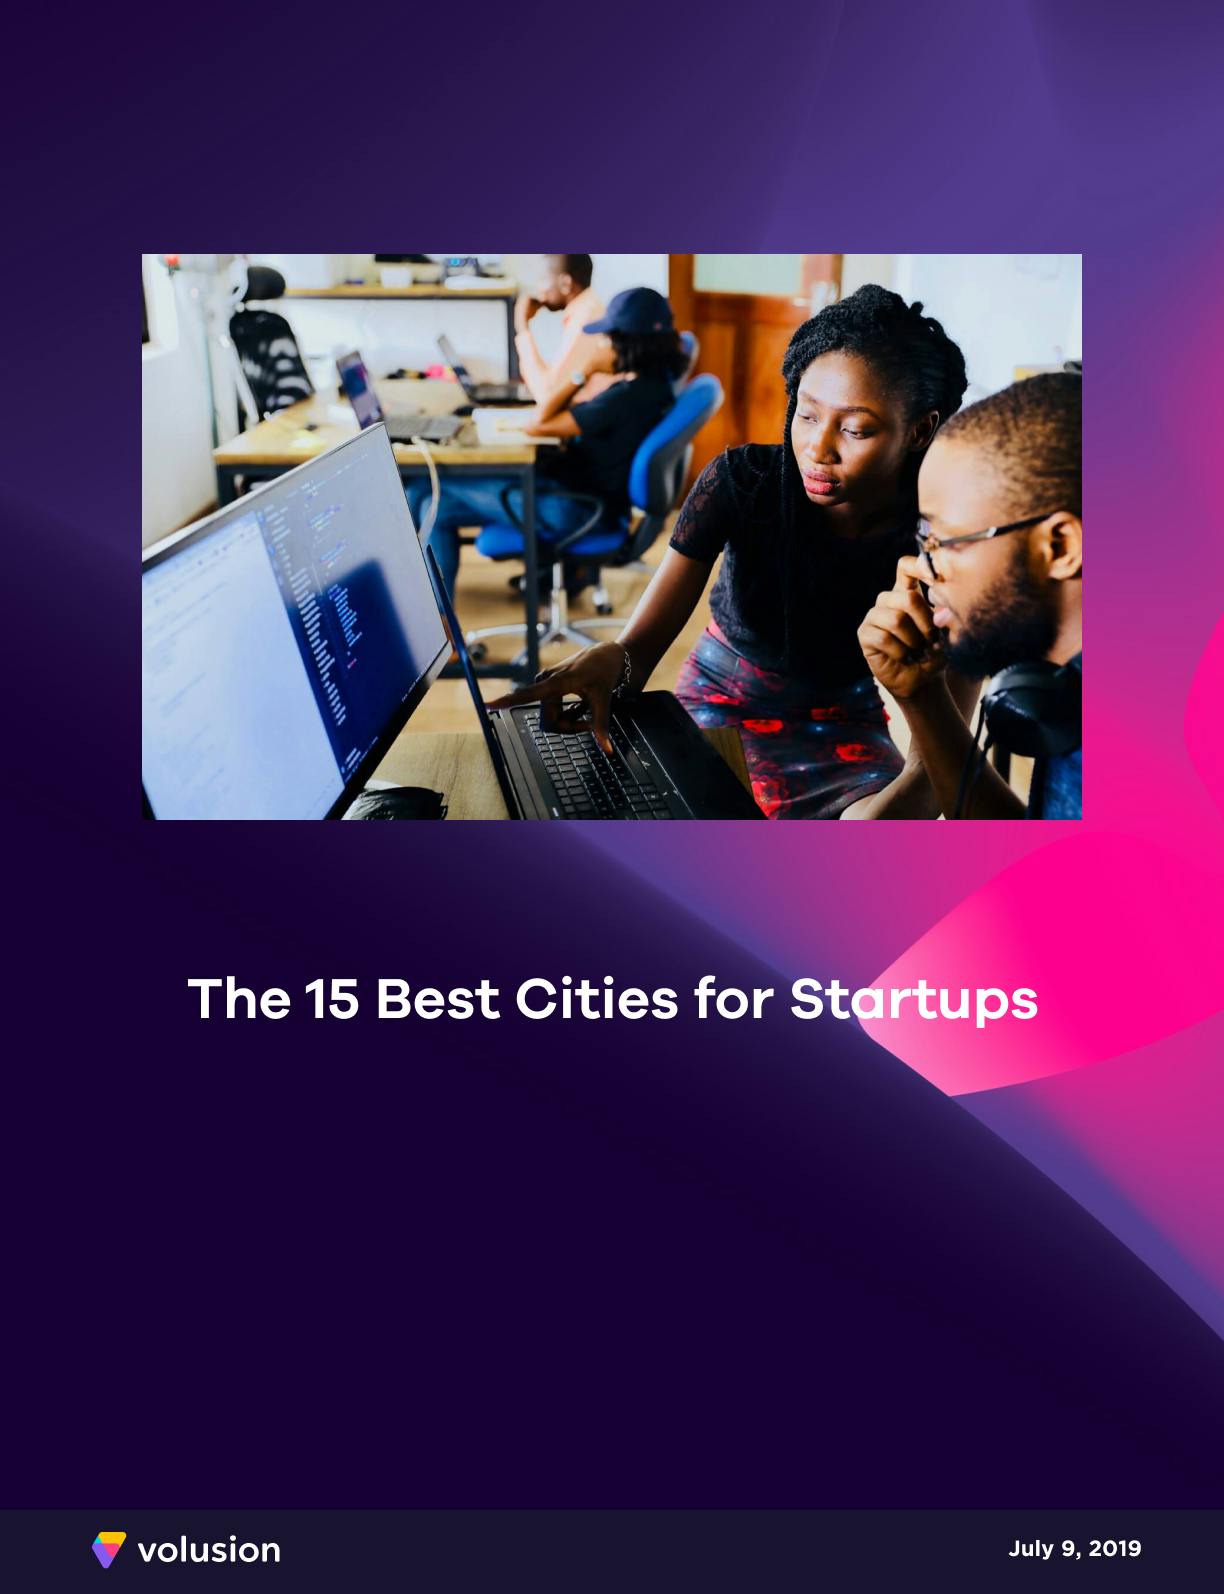 The 15 Best Cities for Startups